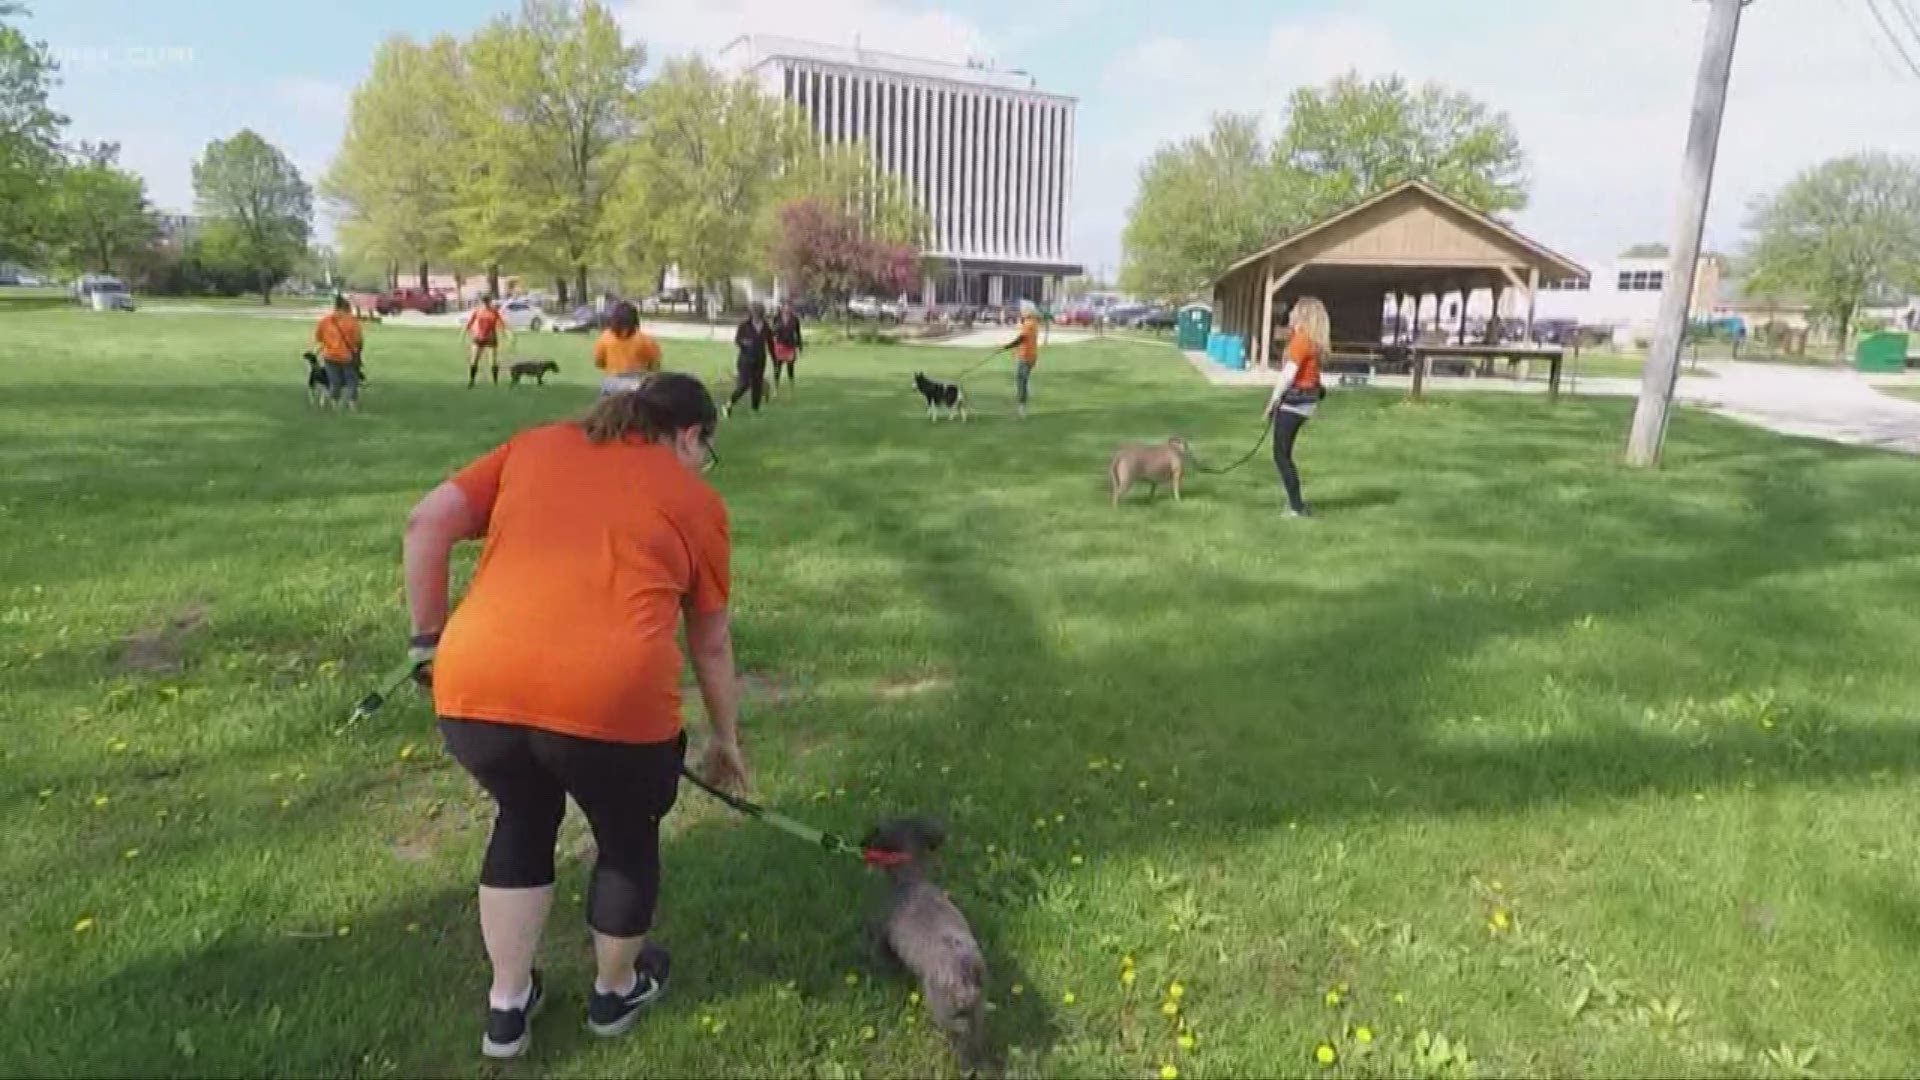 The organization takes adoptable dogs out for a run, giving them space and time away from the shelter